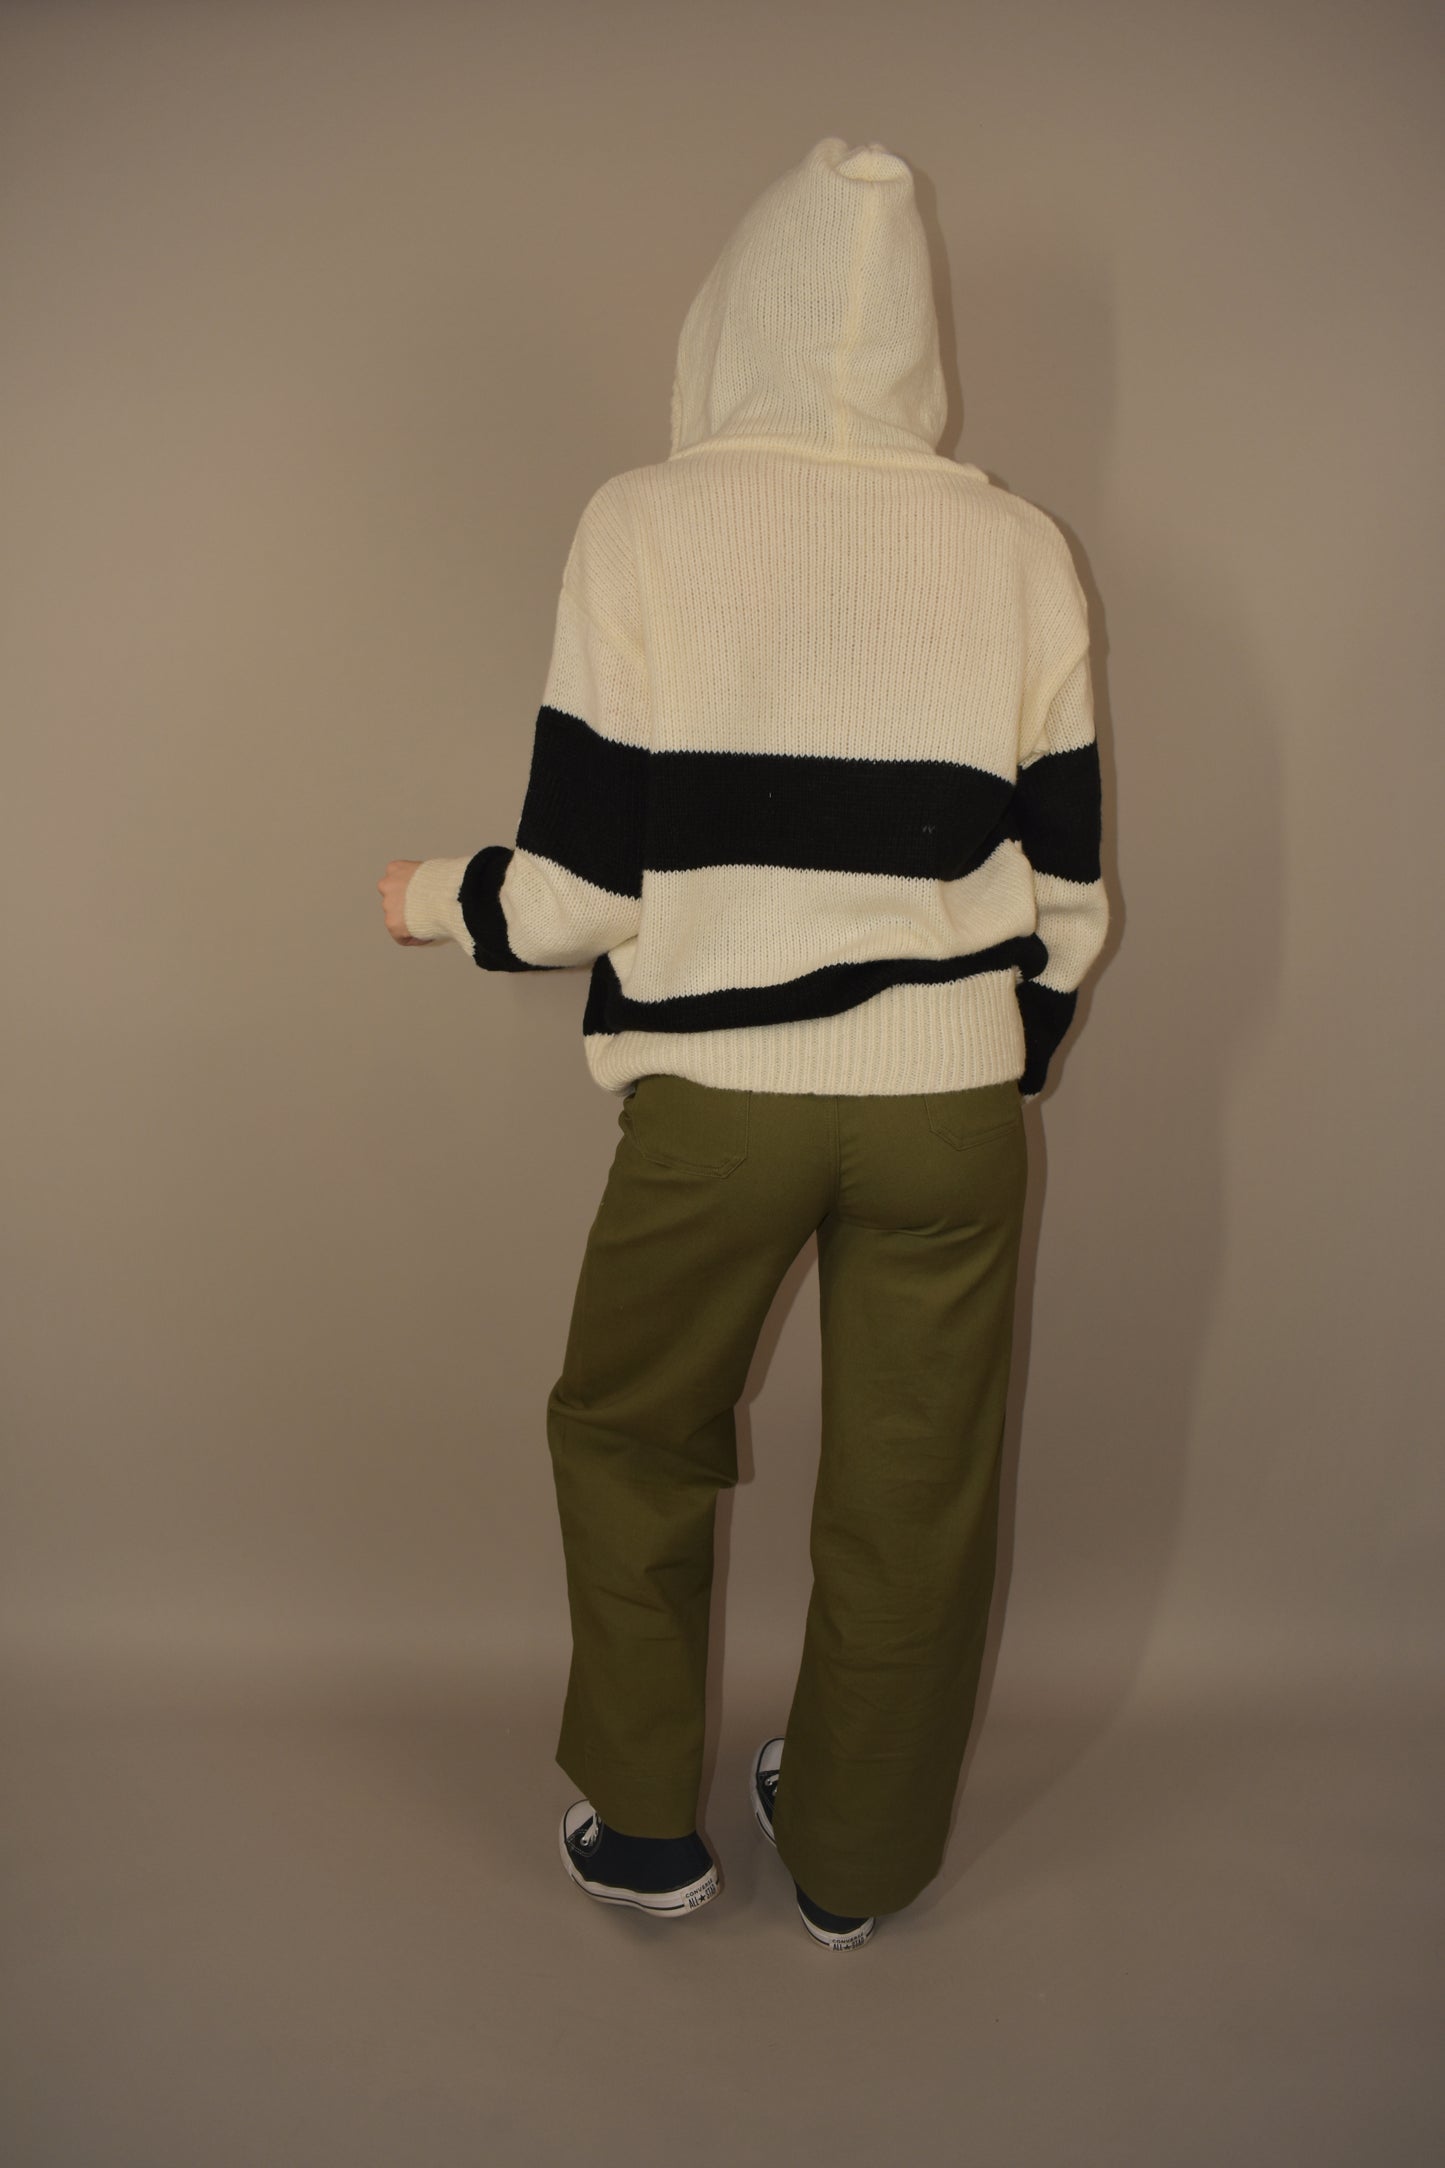 oversized knitted hoodie with two black stripes across the body and goes onto the arms